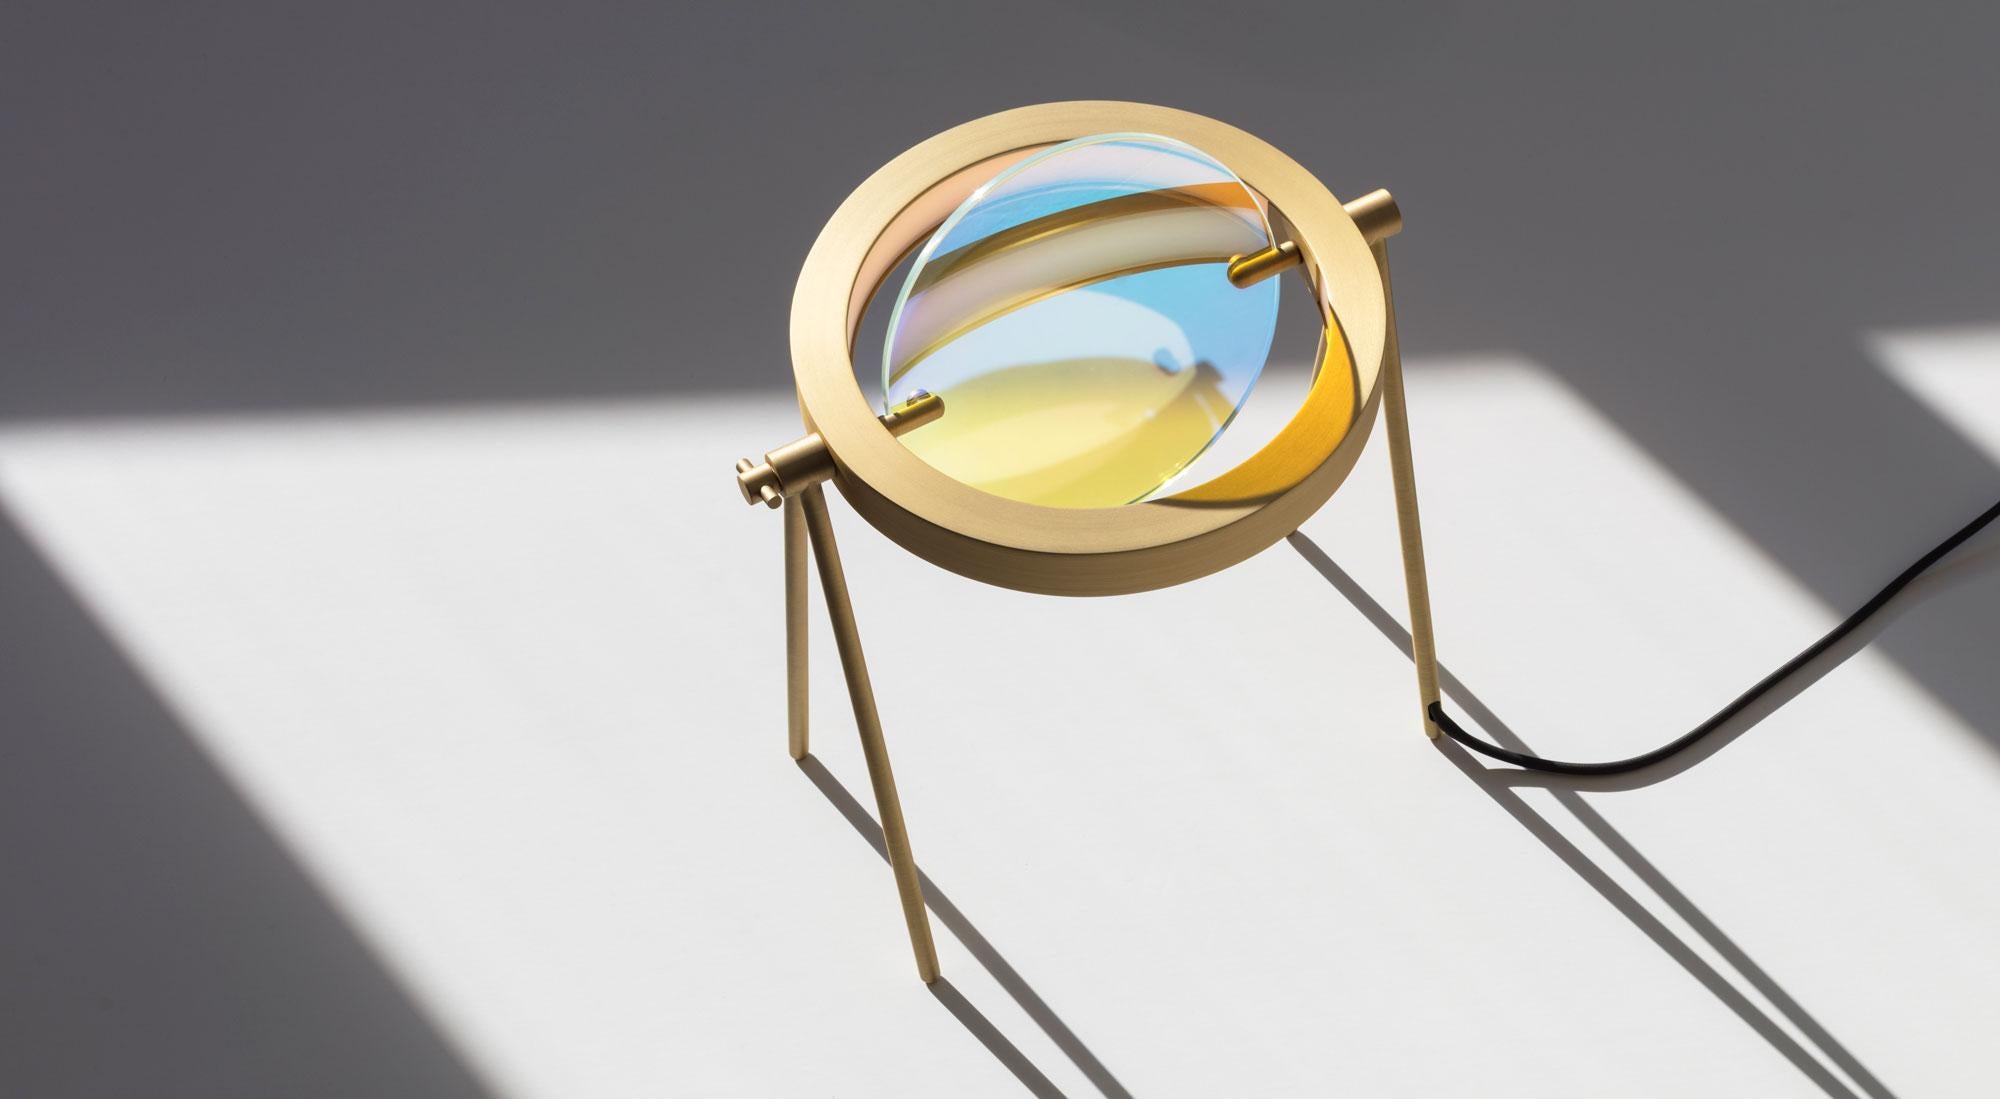 Janus, one of Saturn’s outermost rings, is the eponym and inspiration for this table lamp, Trueing's inaugural product. With an adjustable shade of glass at its centre, the lamp’s luminous brass ring shines inwards to create an aurora-like